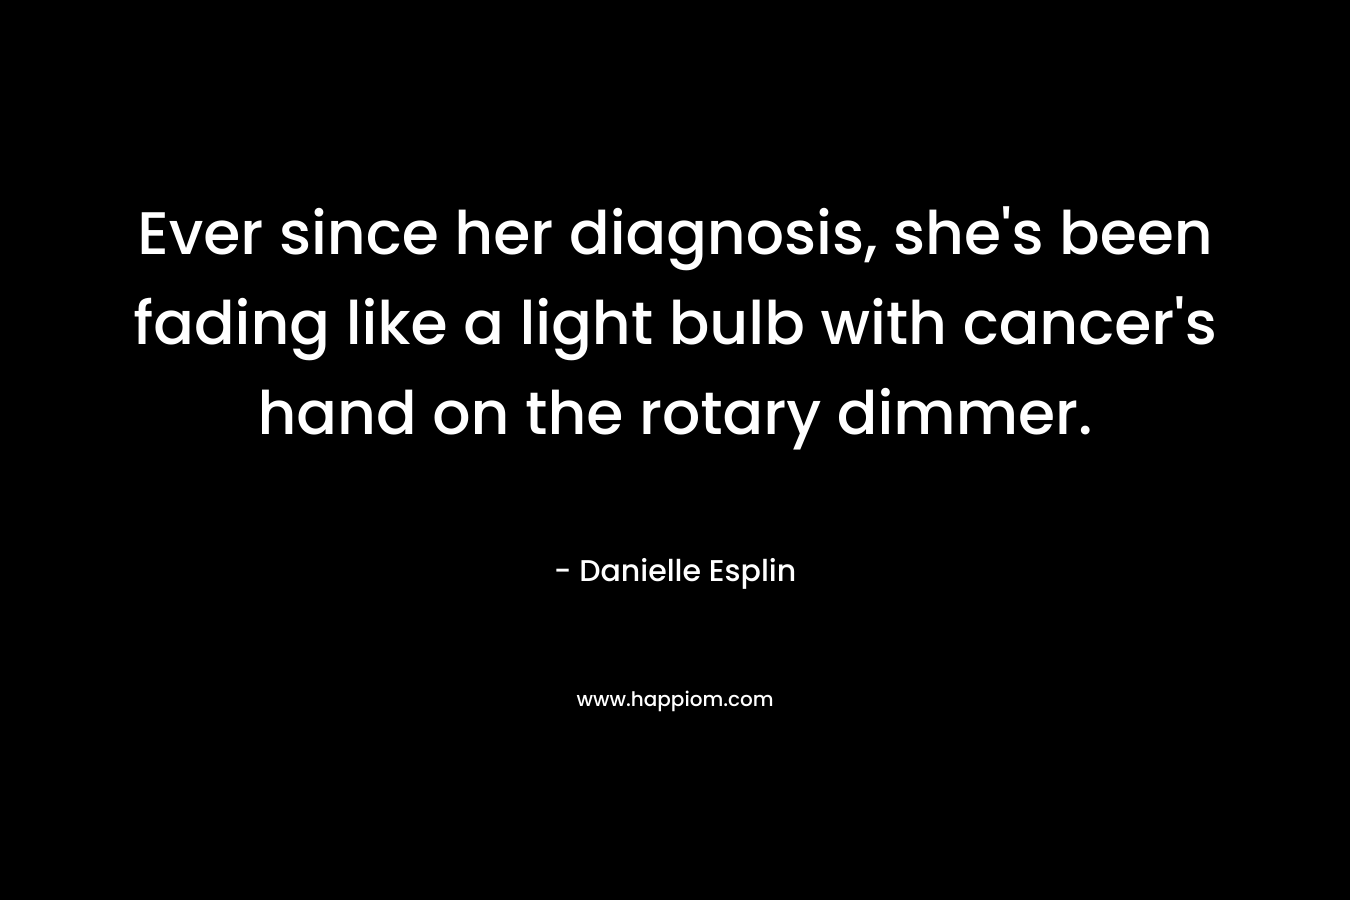 Ever since her diagnosis, she’s been fading like a light bulb with cancer’s hand on the rotary dimmer. – Danielle Esplin